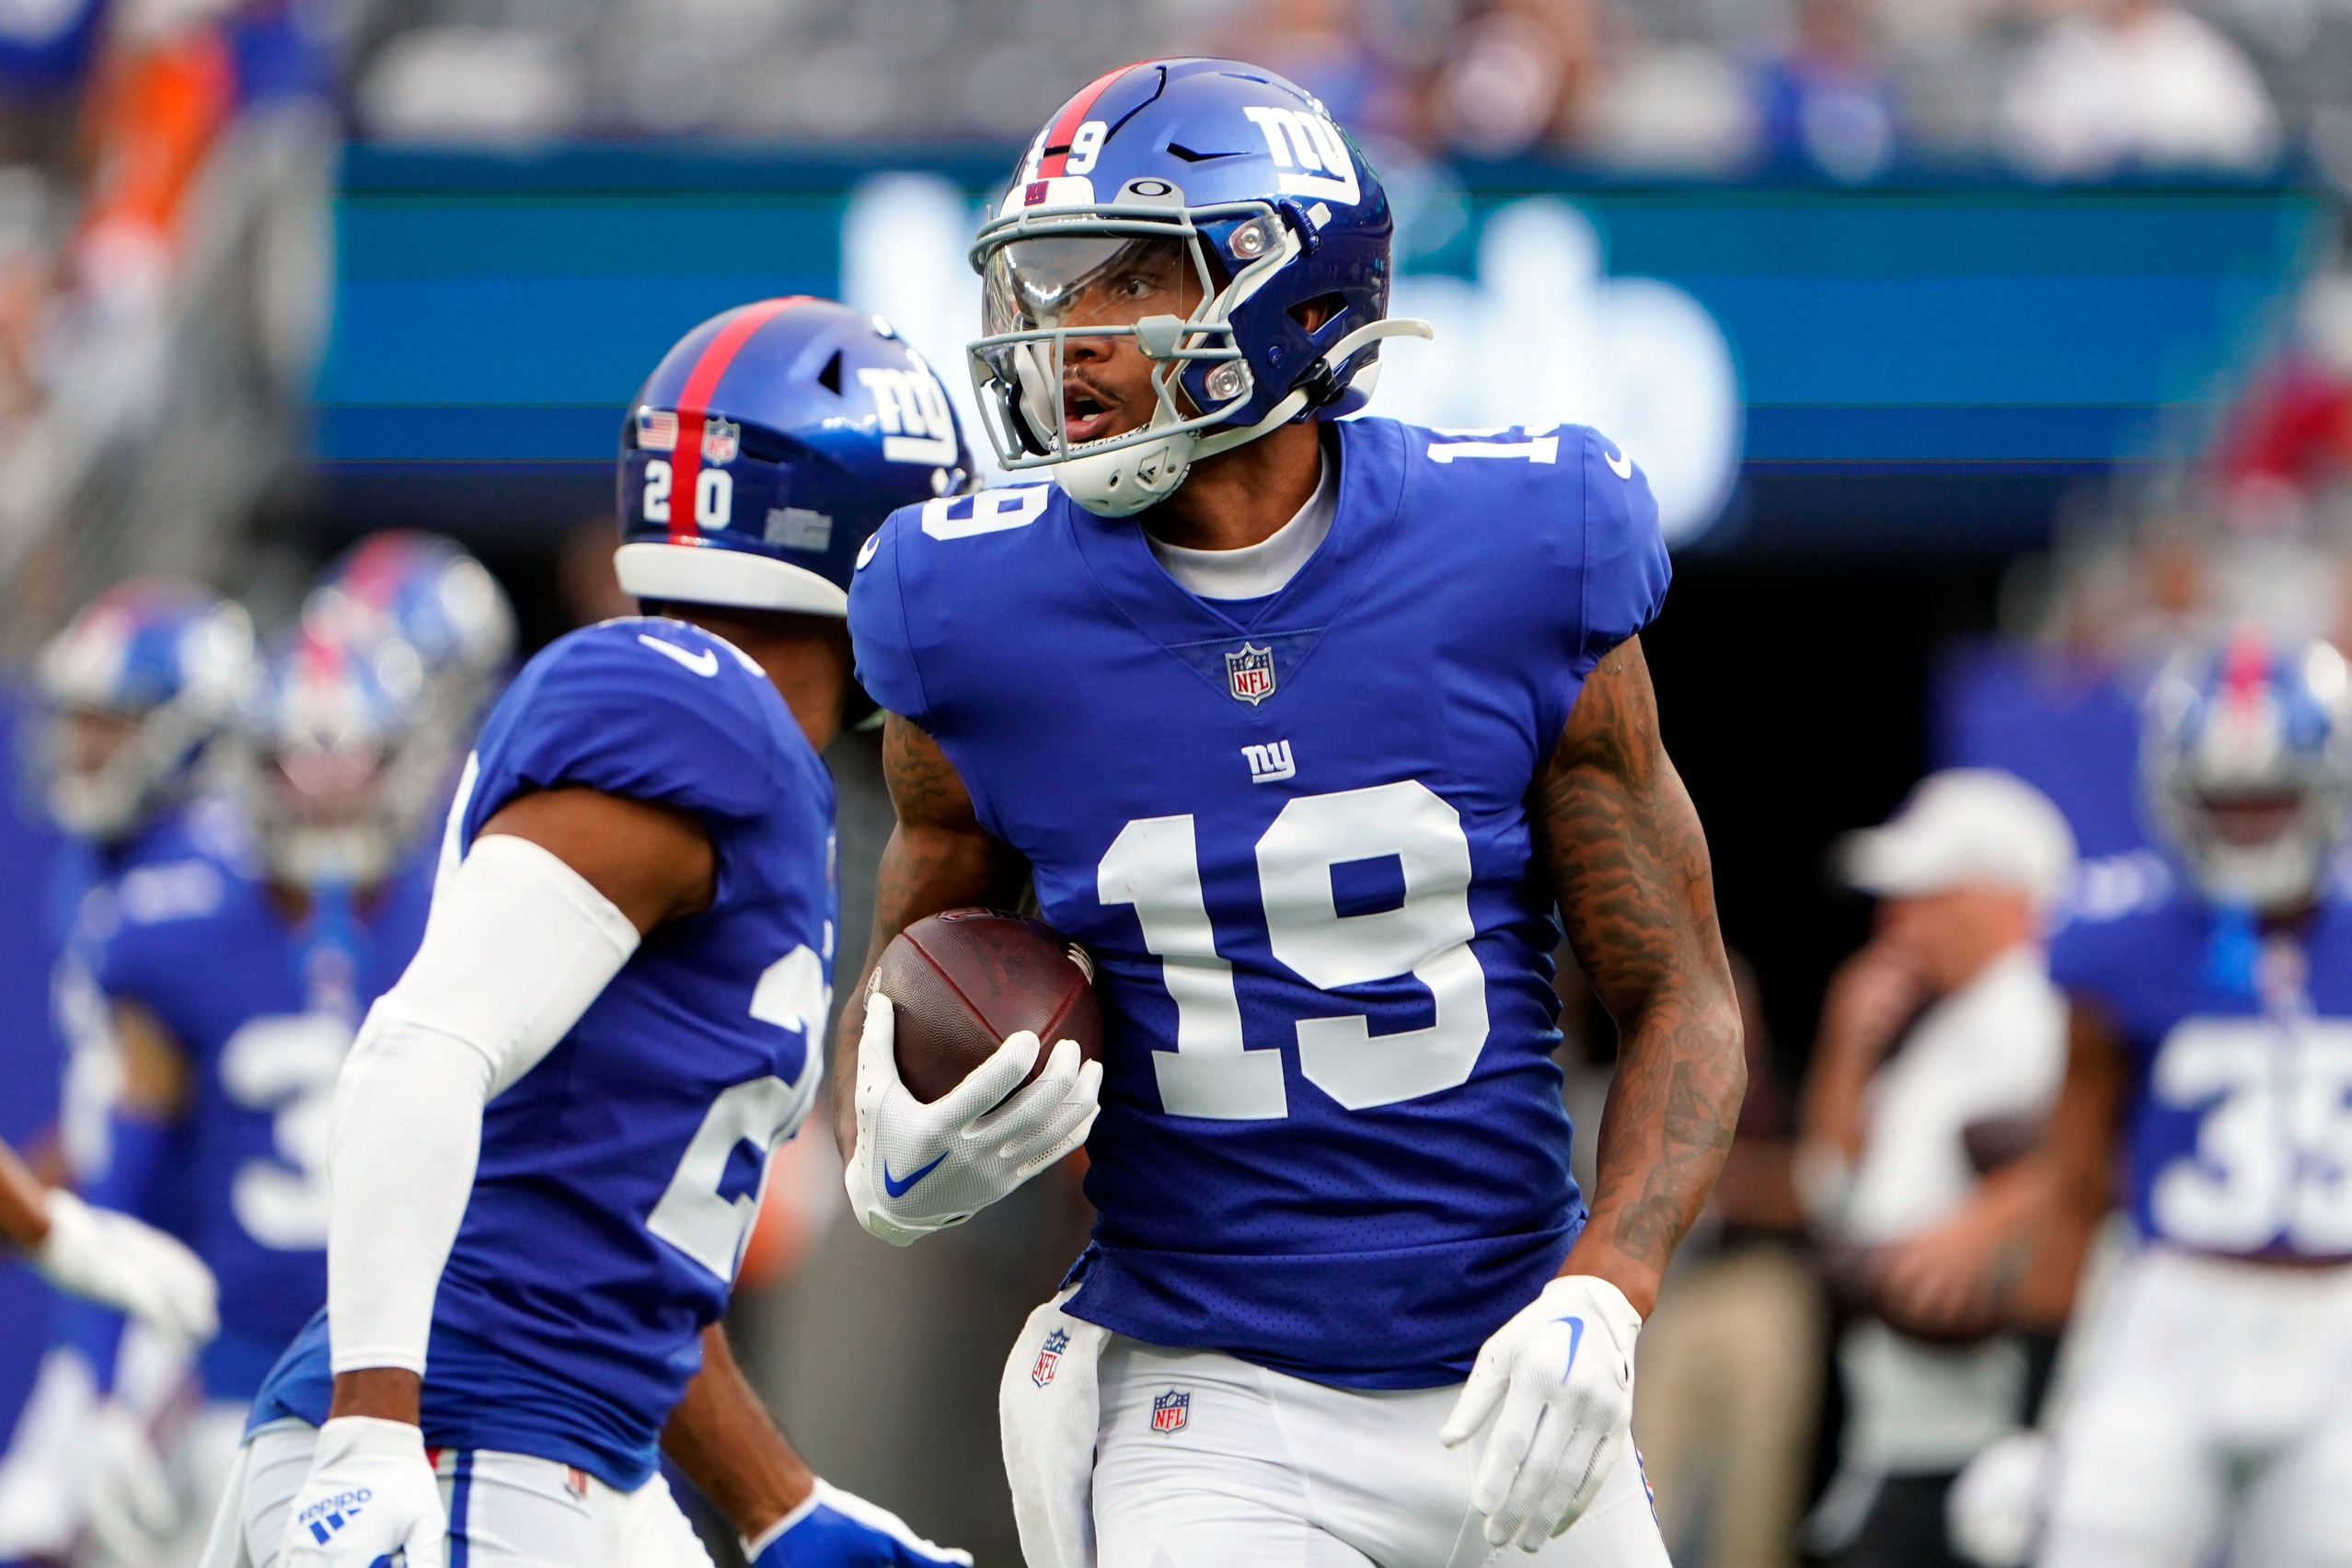 New York Giants wide receiver Kenny Golladay (19) warms up before a preseason game at MetLife Stadium on August 21, 2022, in East Rutherford.